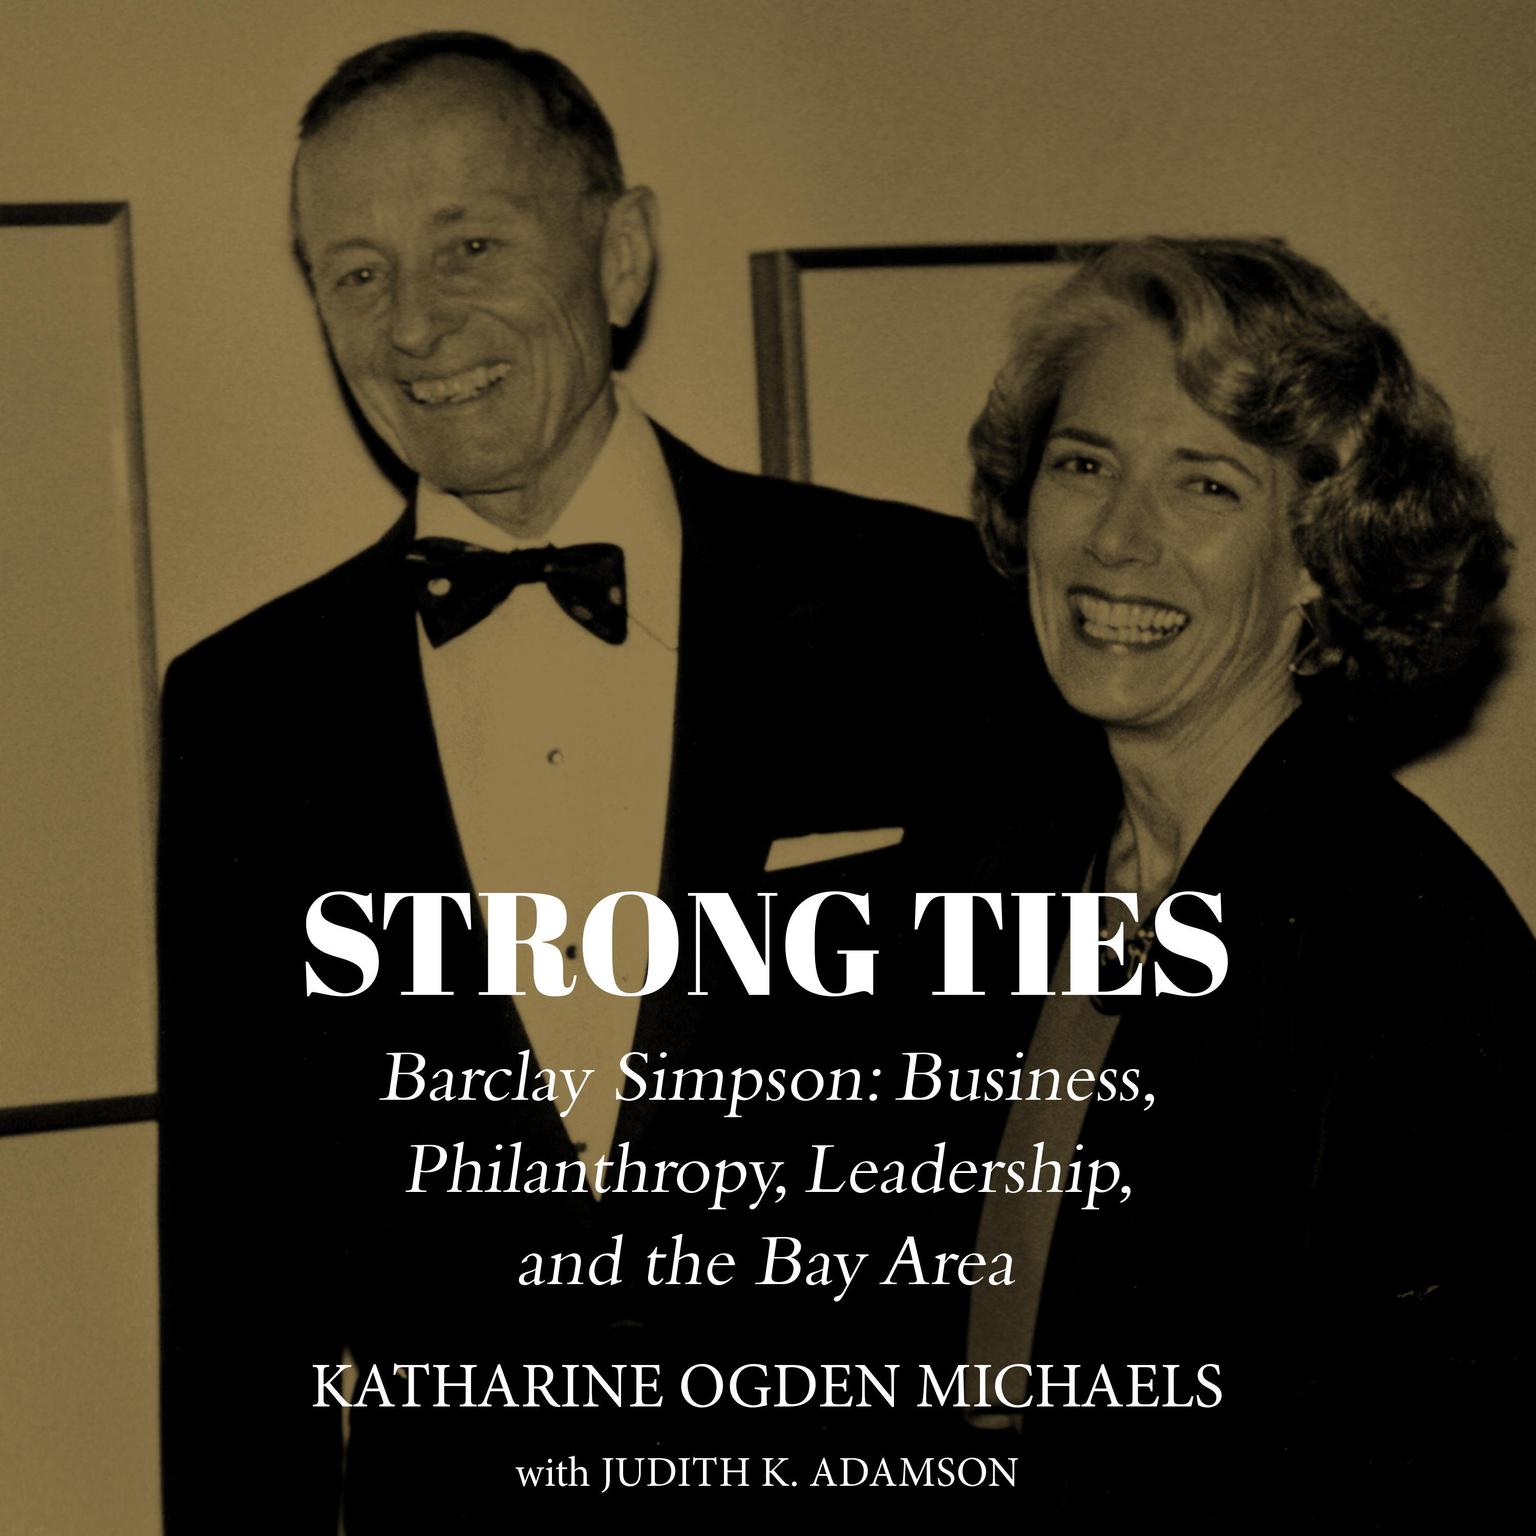 Strong Ties: Barclay Simpson: Business, Philanthropy, Leadership, and the Bay Area Audiobook, by Katharine Ogden Michaels